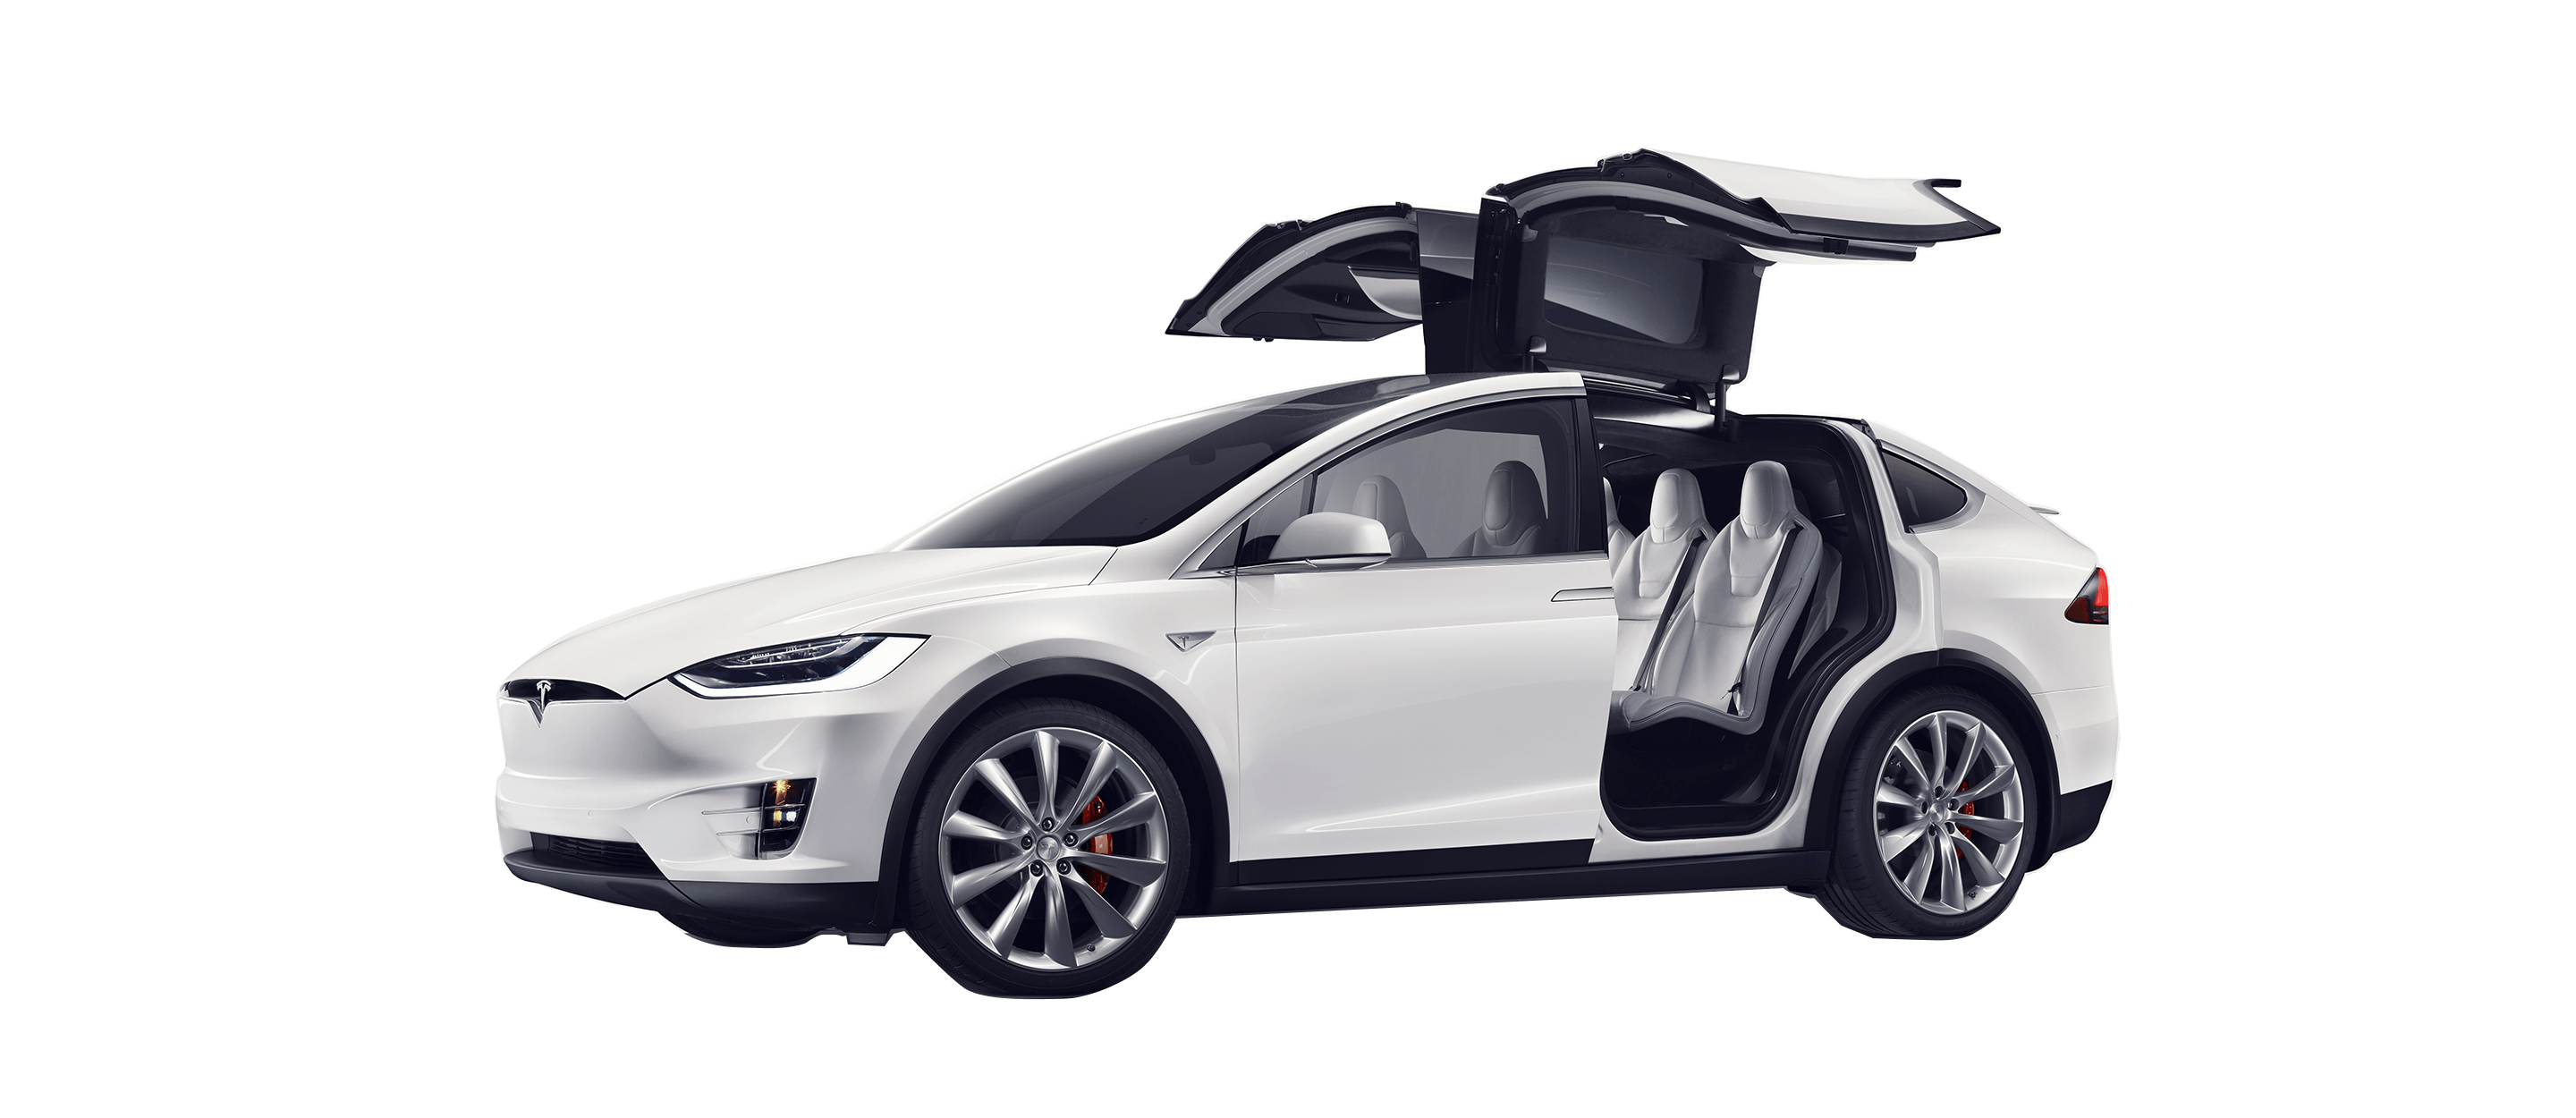 My First Look at a Tesla Model X